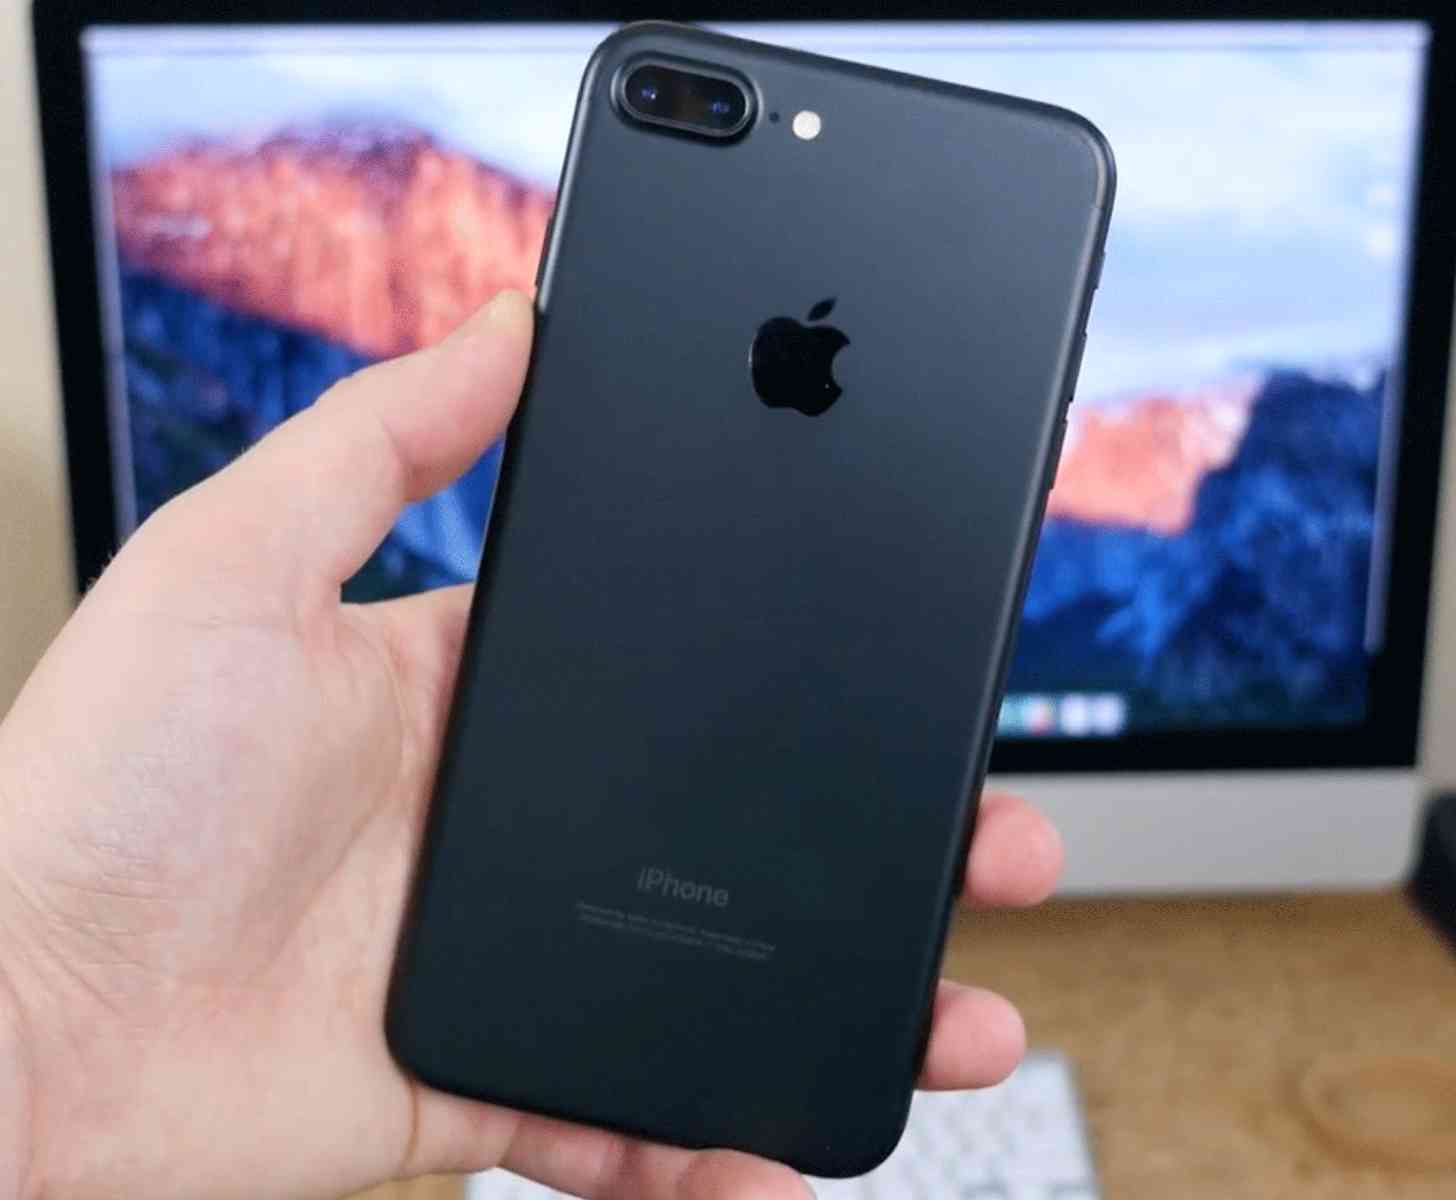 iPhone 7 Plus hands-on